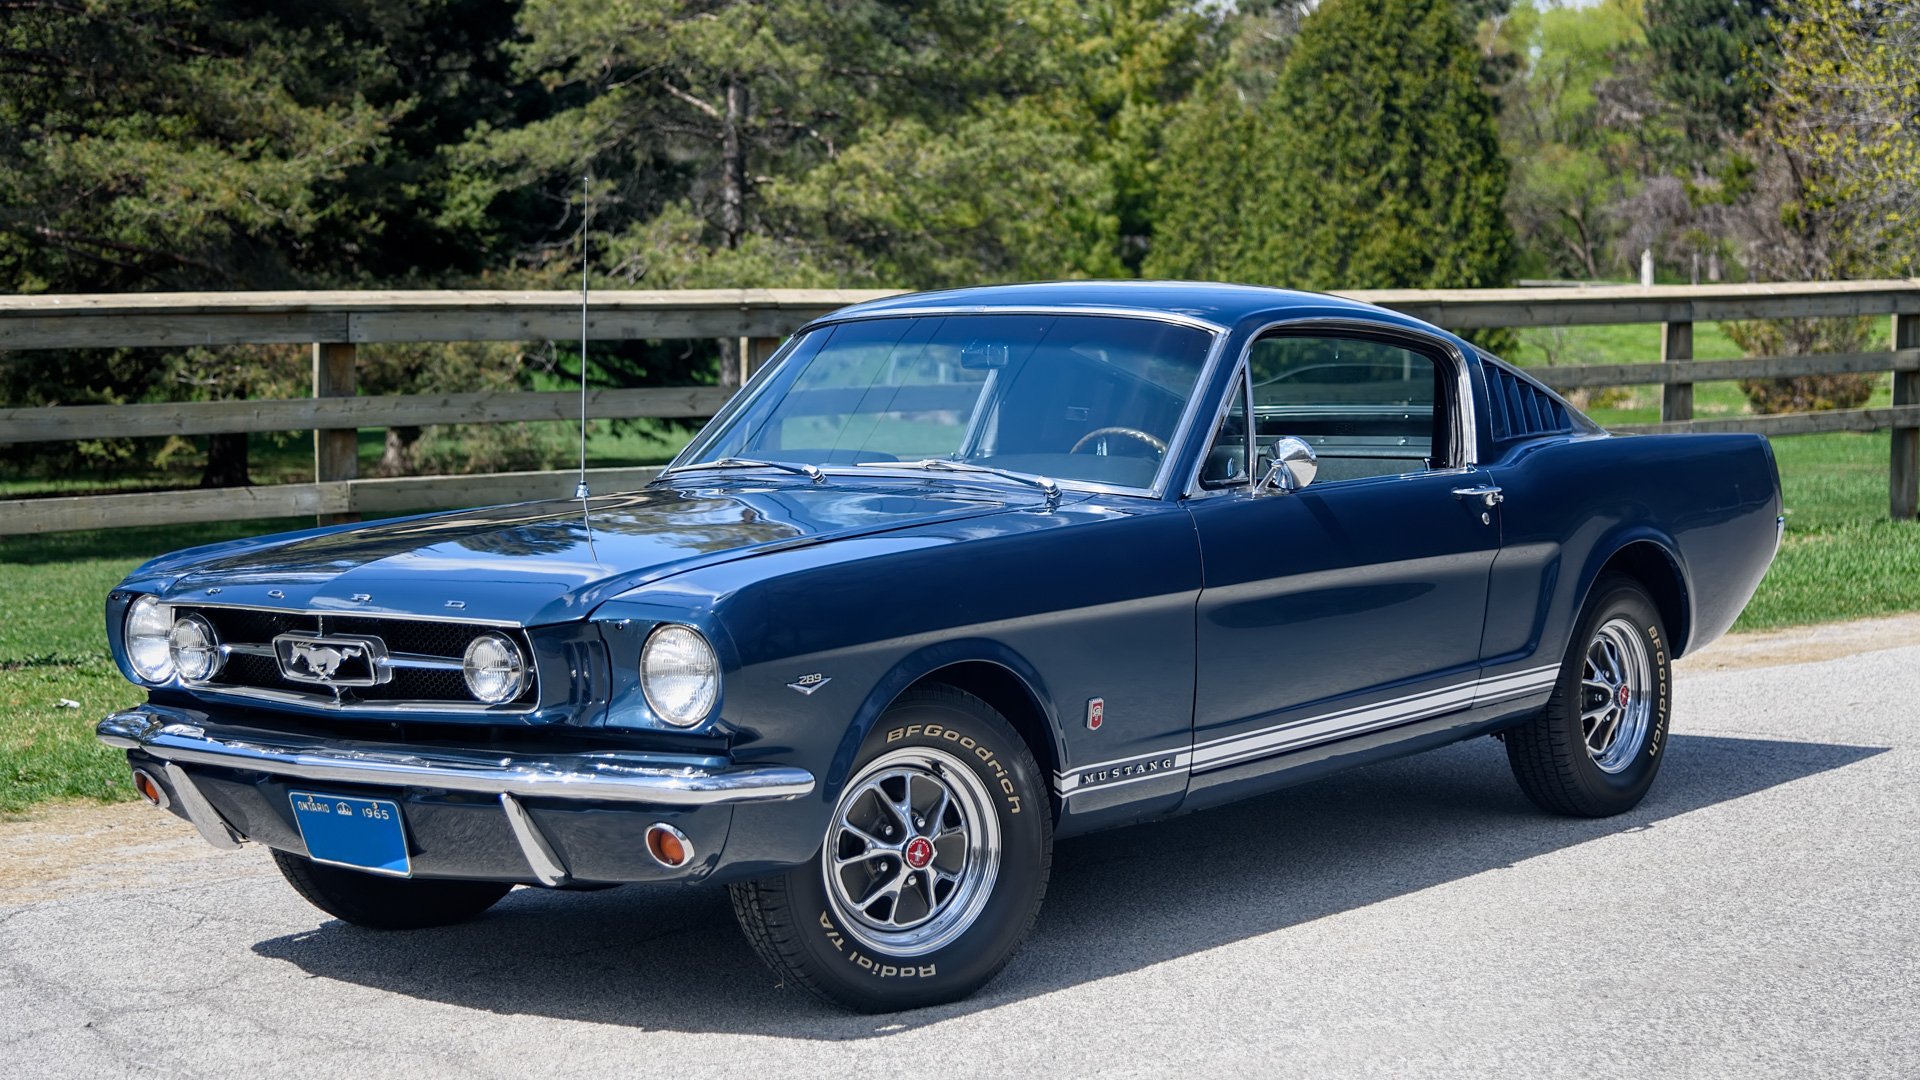 1965 Mustang GT Fastback Full HD Wallpaper and Background Image